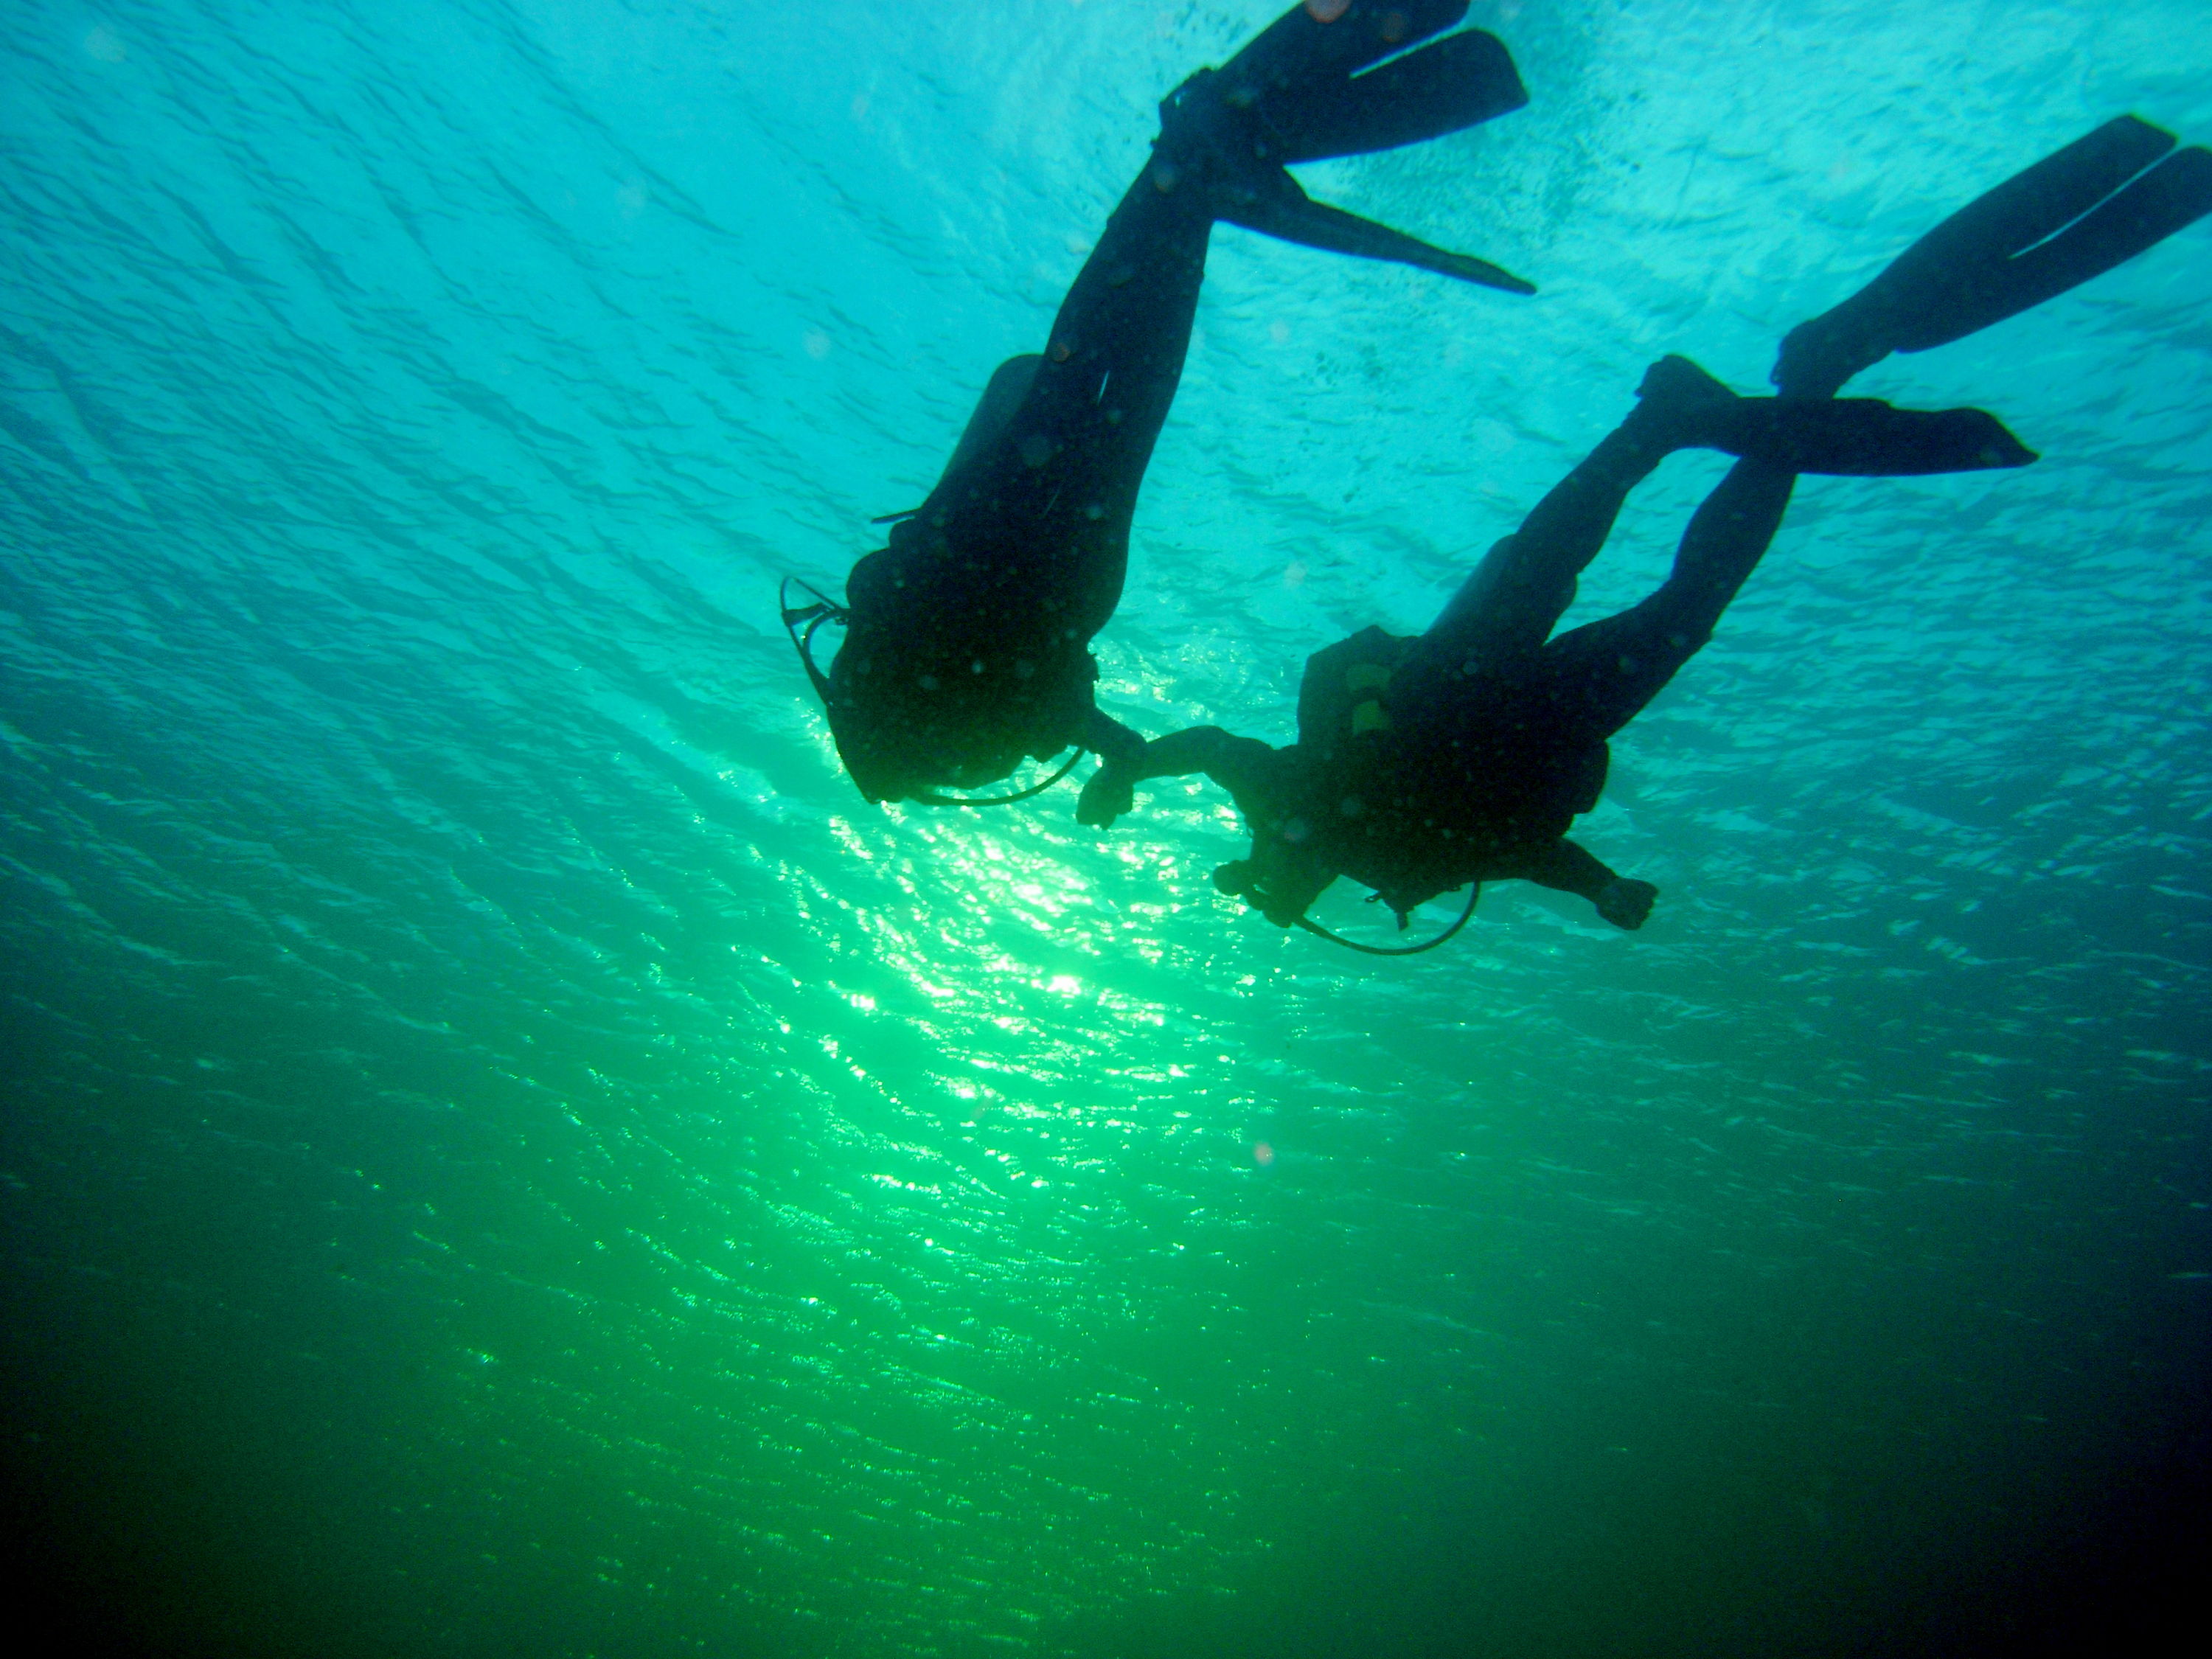 Families who dive together...